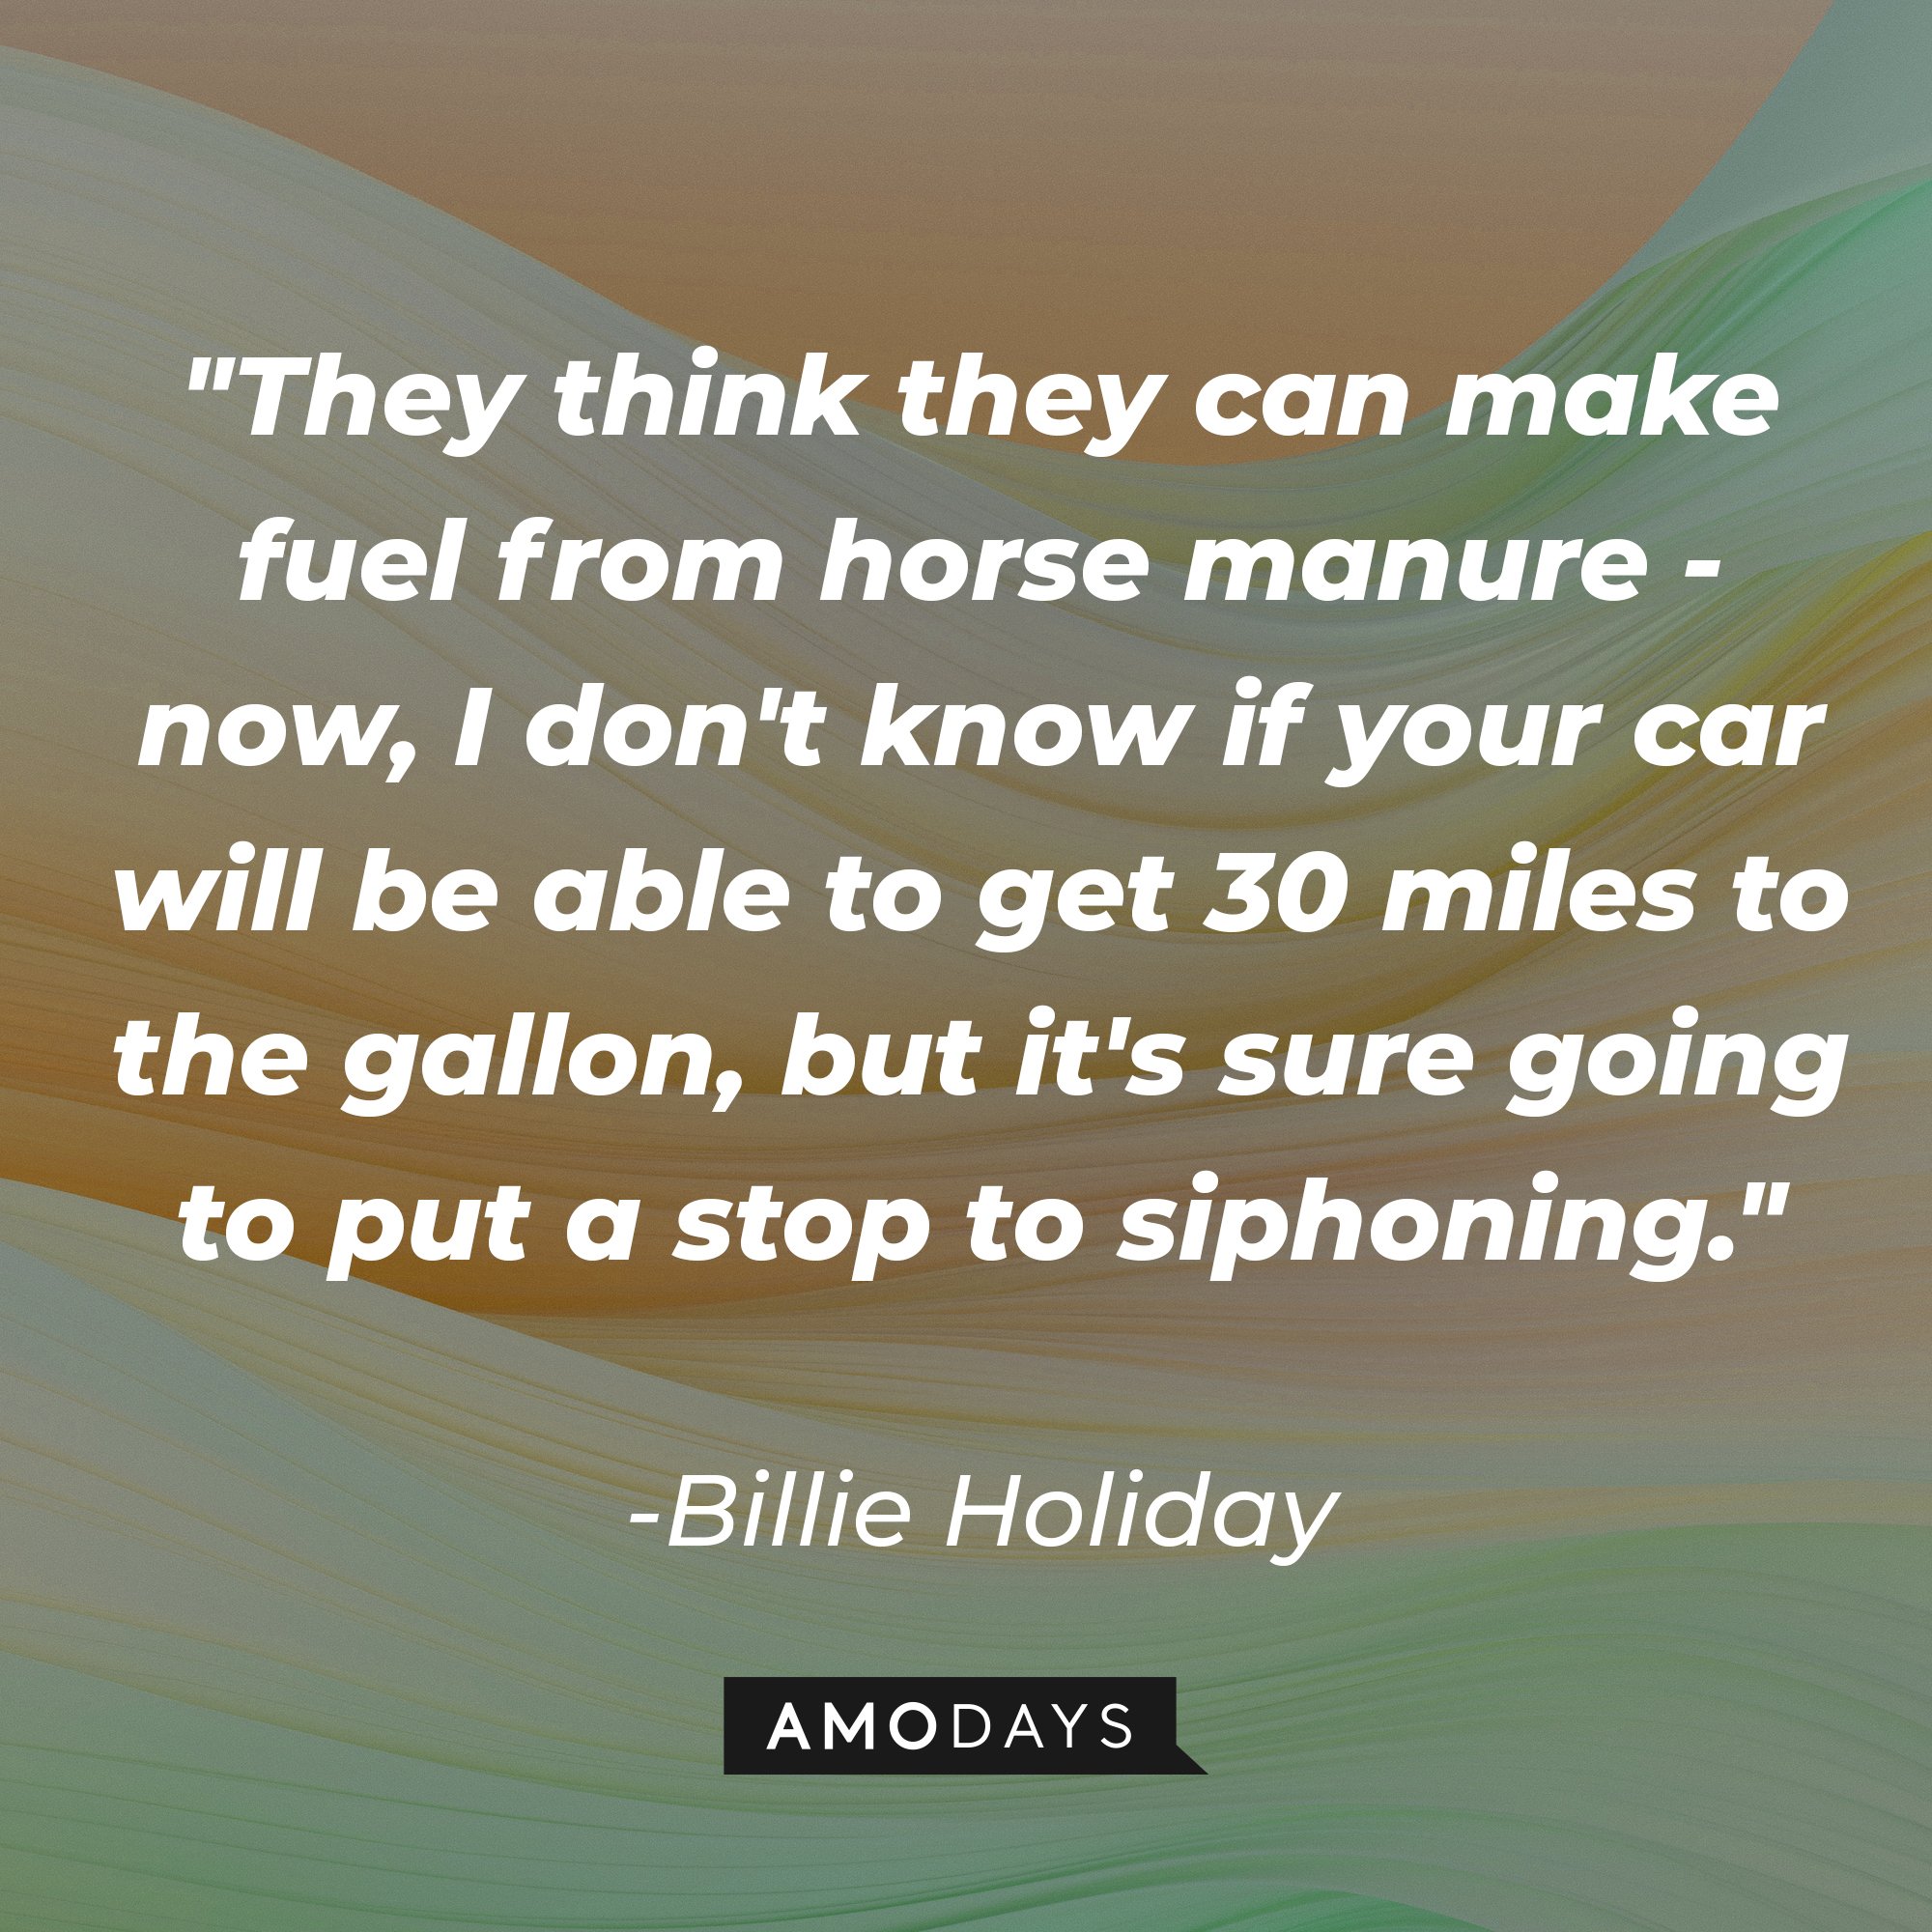 Billie Holiday's quote "They think they can make fuel from horse manure - now, I don't know if your car will be able to get 30 miles to the gallon, but it's sure going to put a stop to siphoning." | Source: Unsplash.com